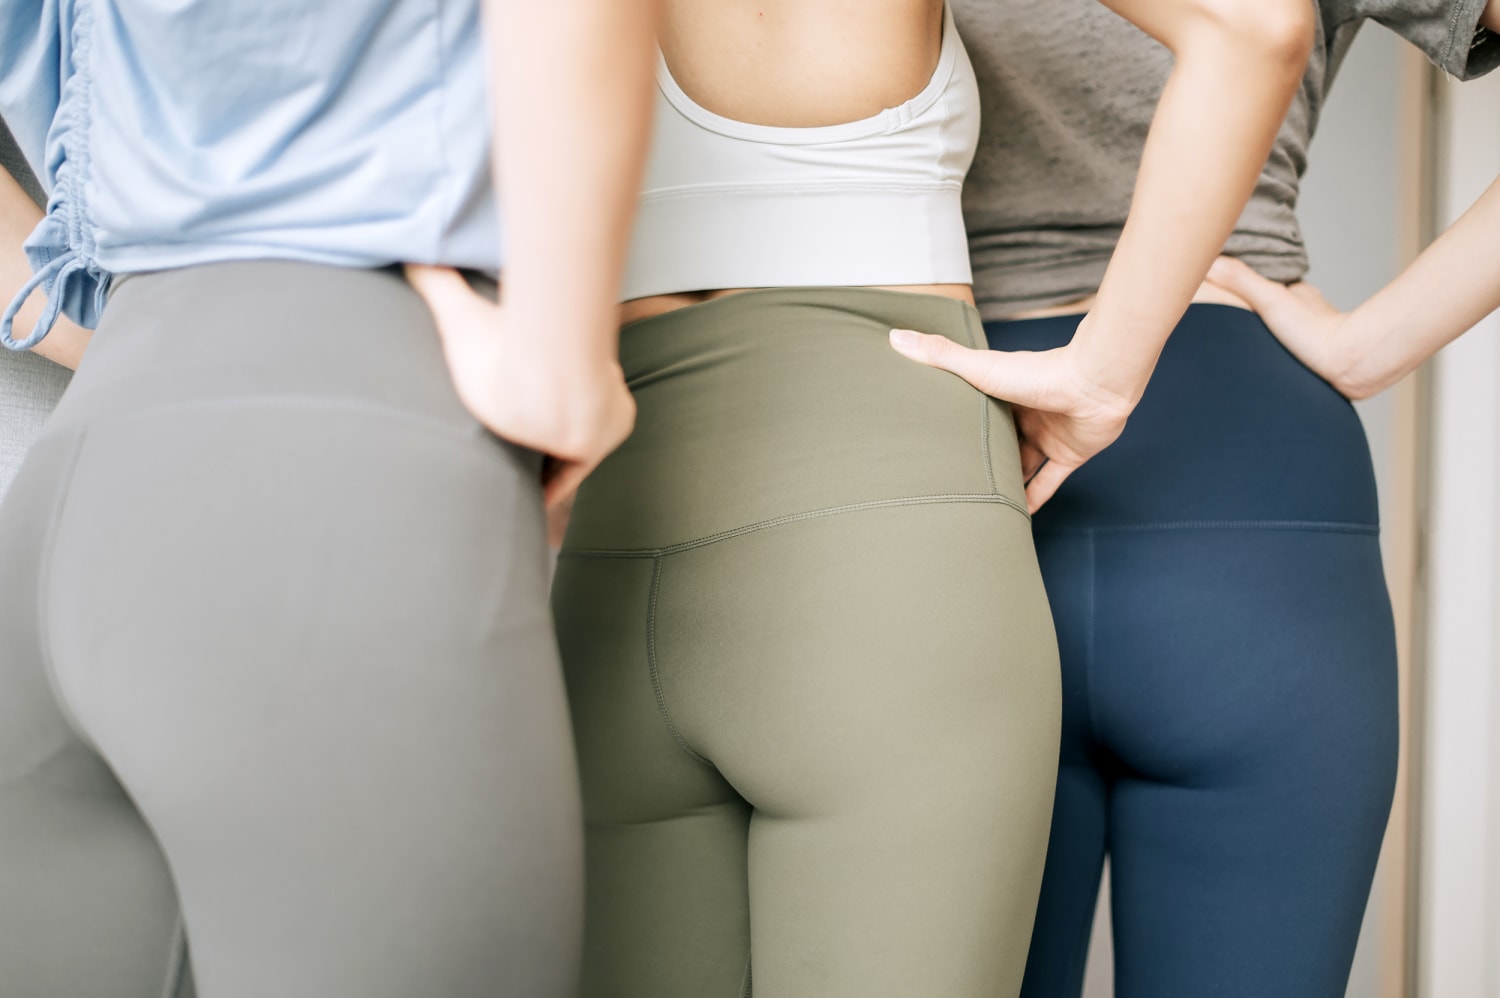 What are Hip Dips? How to Get Rid of Hip Dips. Trochanteric Depression